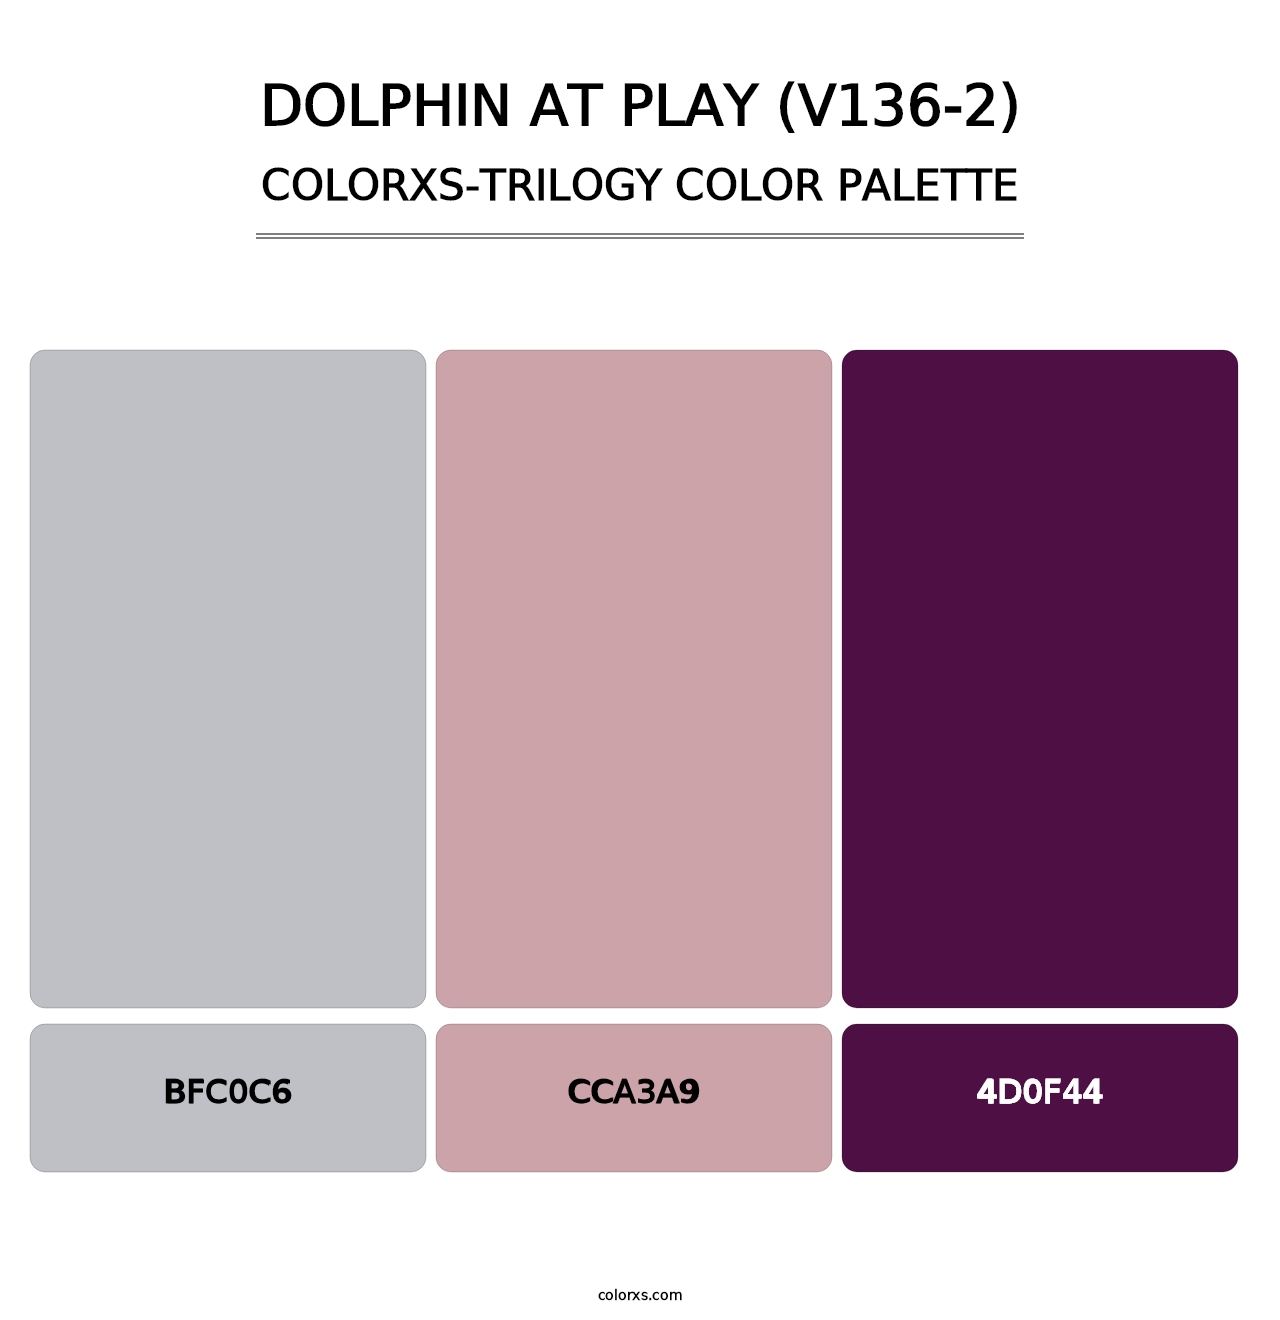 Dolphin at Play (V136-2) - Colorxs Trilogy Palette